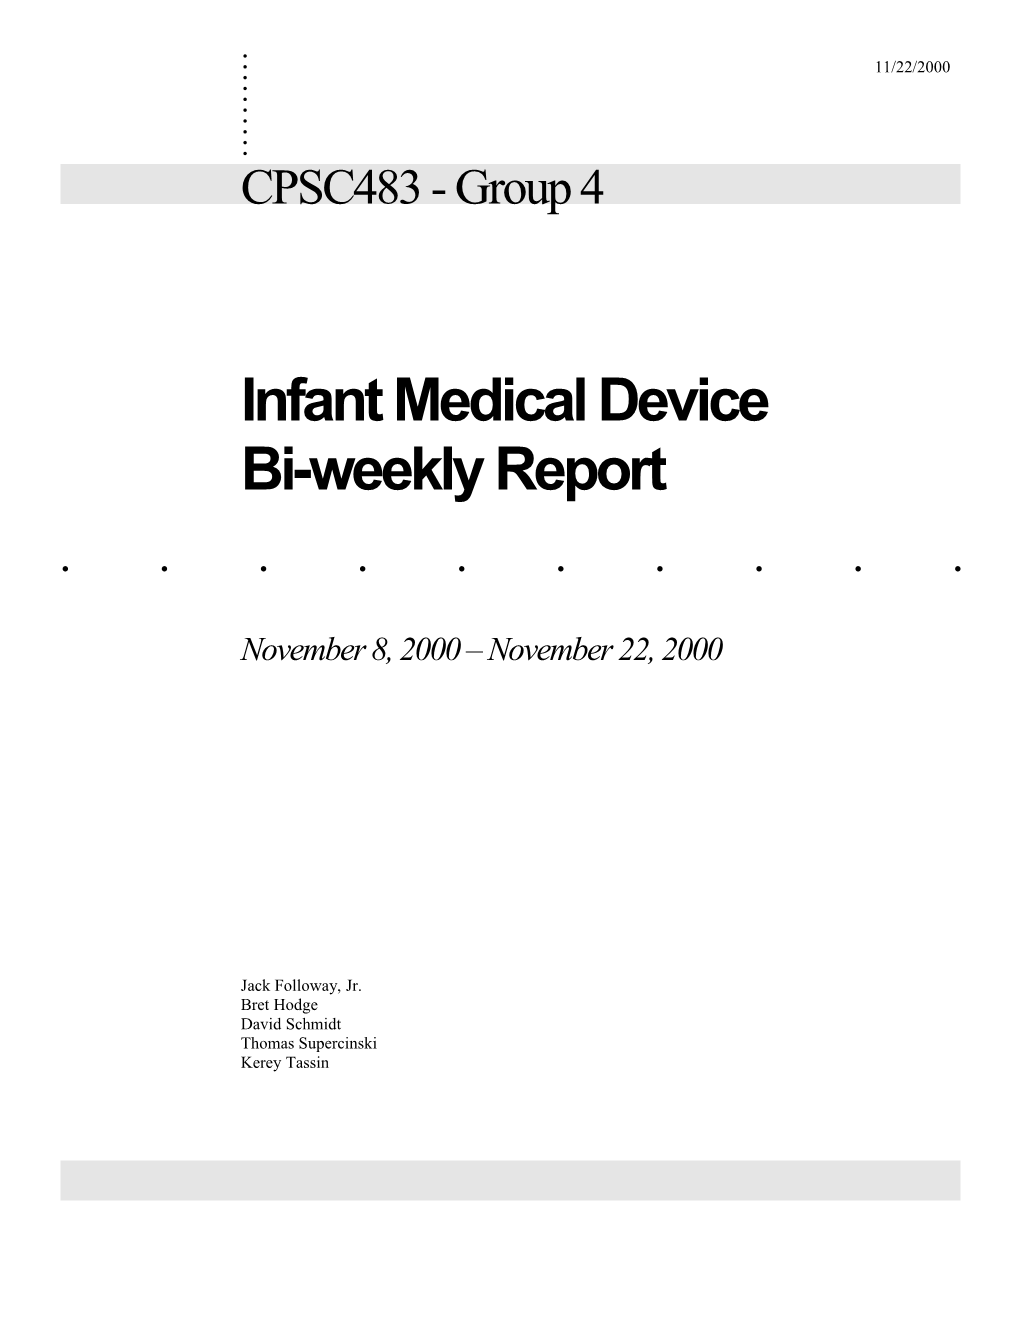 Infant Medical Device Bi-Weekly Report